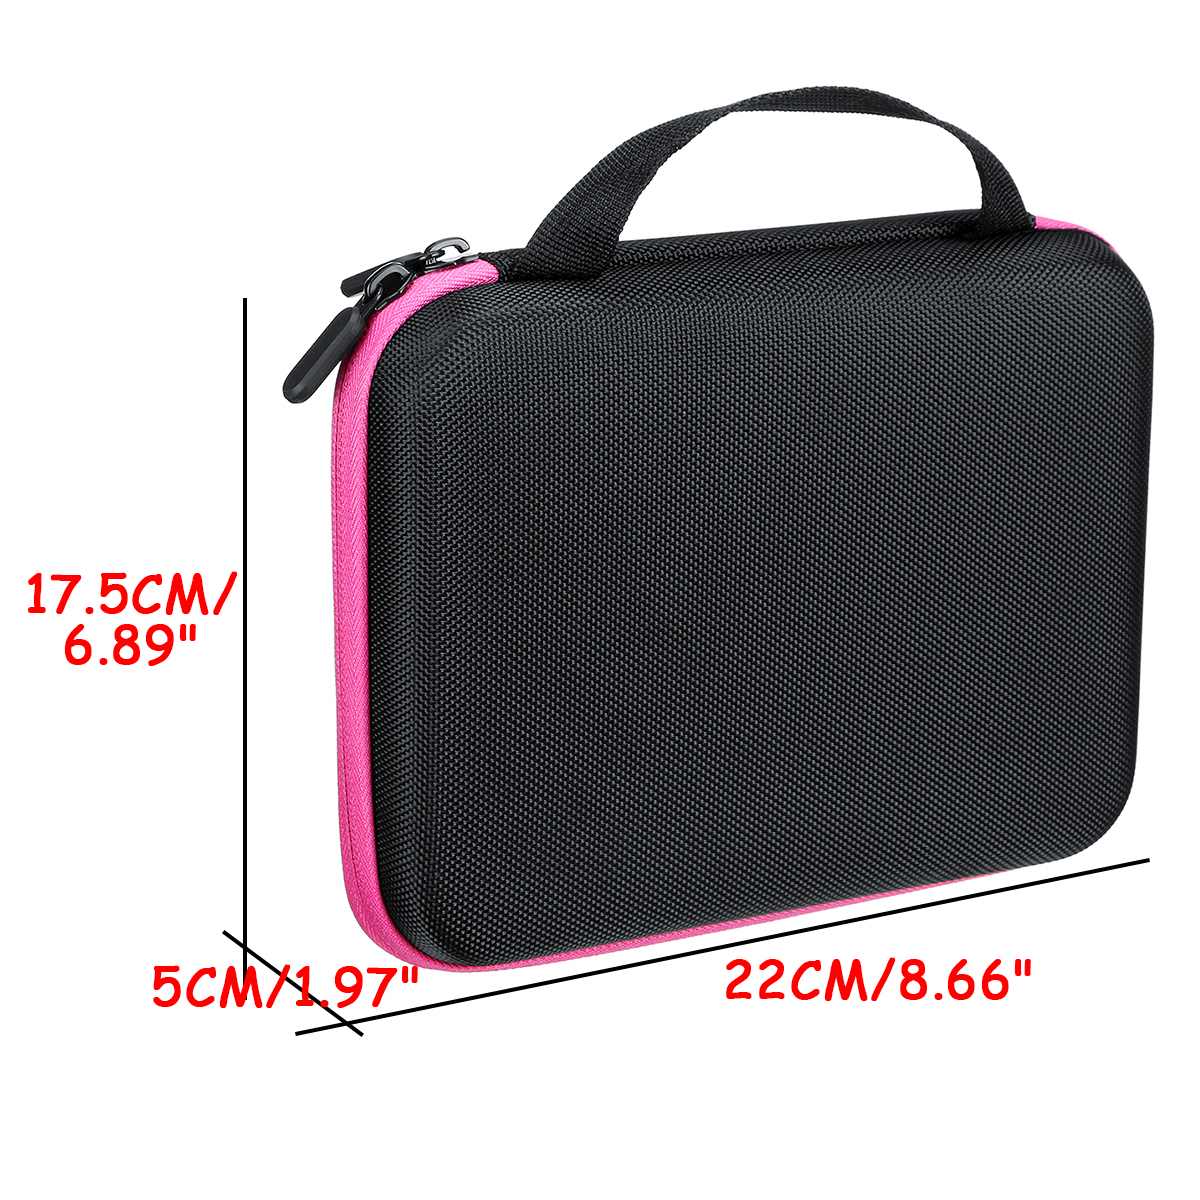 63 Compartments Essential Oil Collecting Storage Bags Storage Case Portable Travel Essential Oil Bottle Oil Box Collecting Case